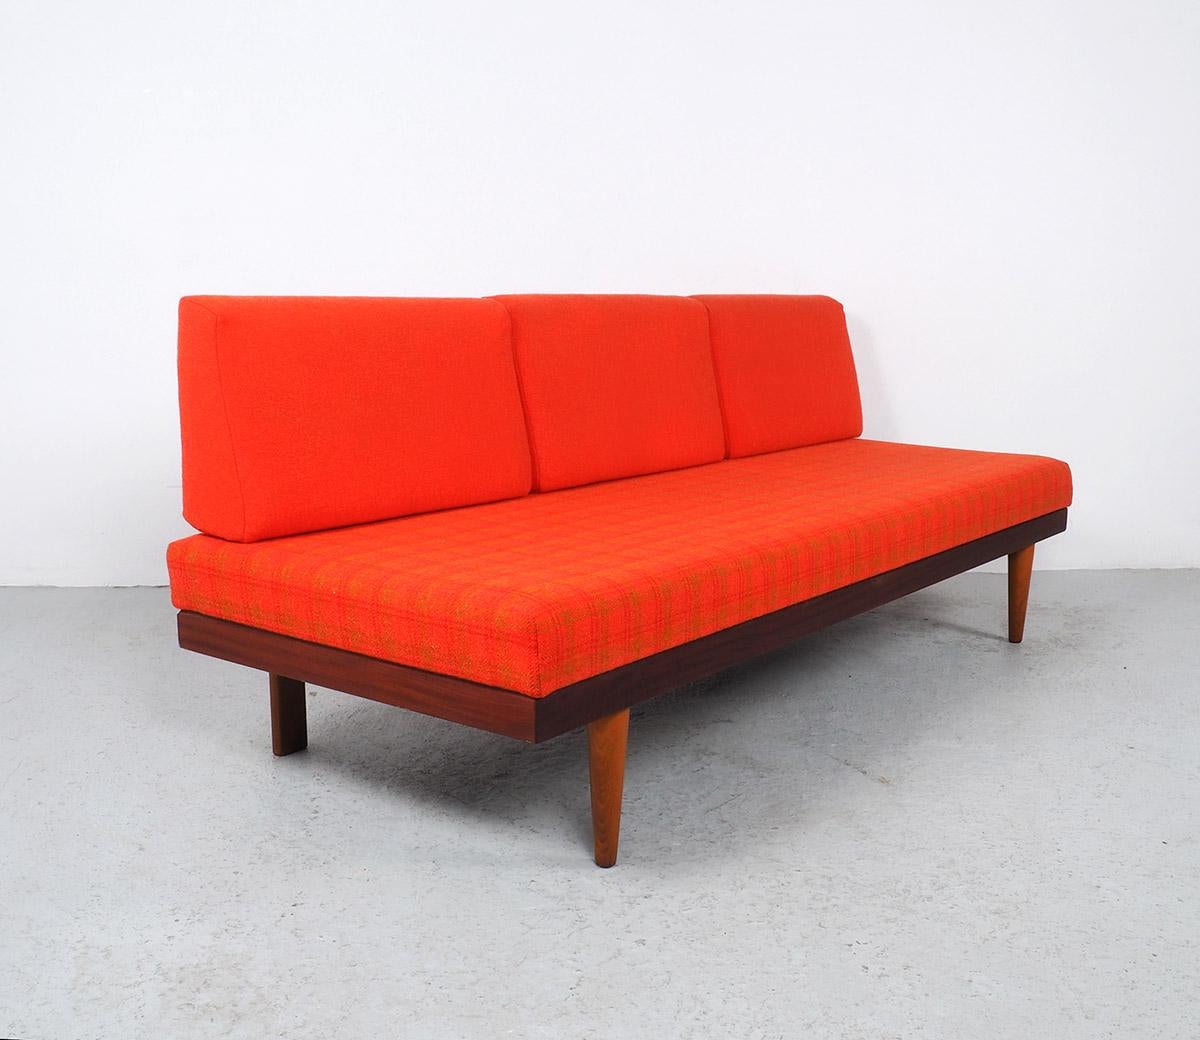 Mid-Century Modern Svane Daybed in Orange Fabric by Ingmar Relling for Ekornes, 1960s